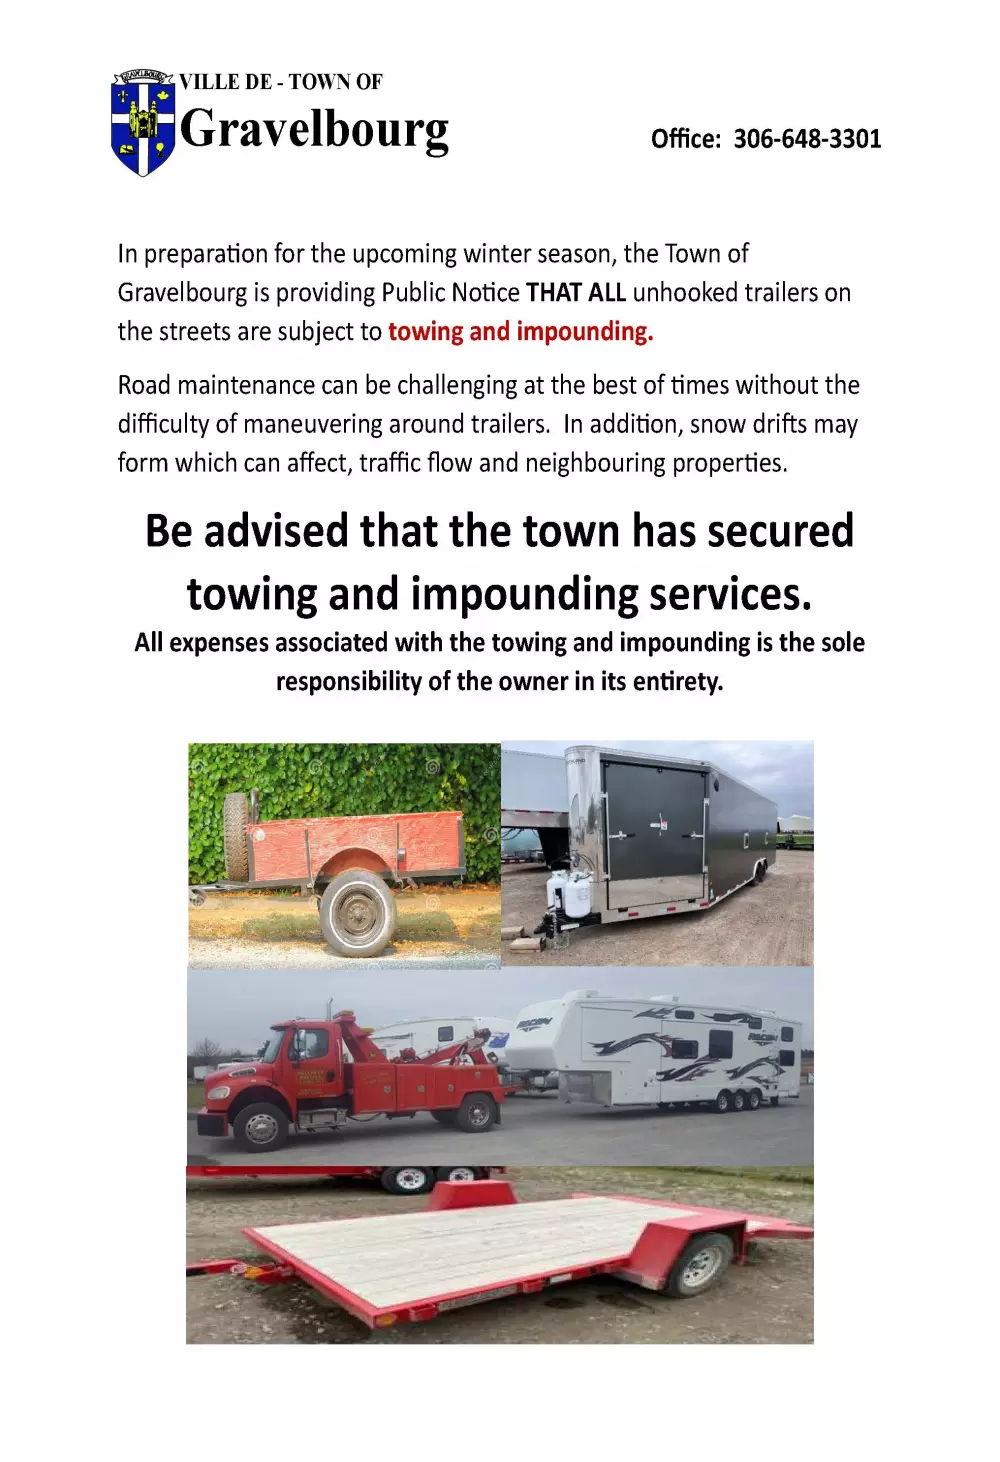 Notice: Unhooked Trailers